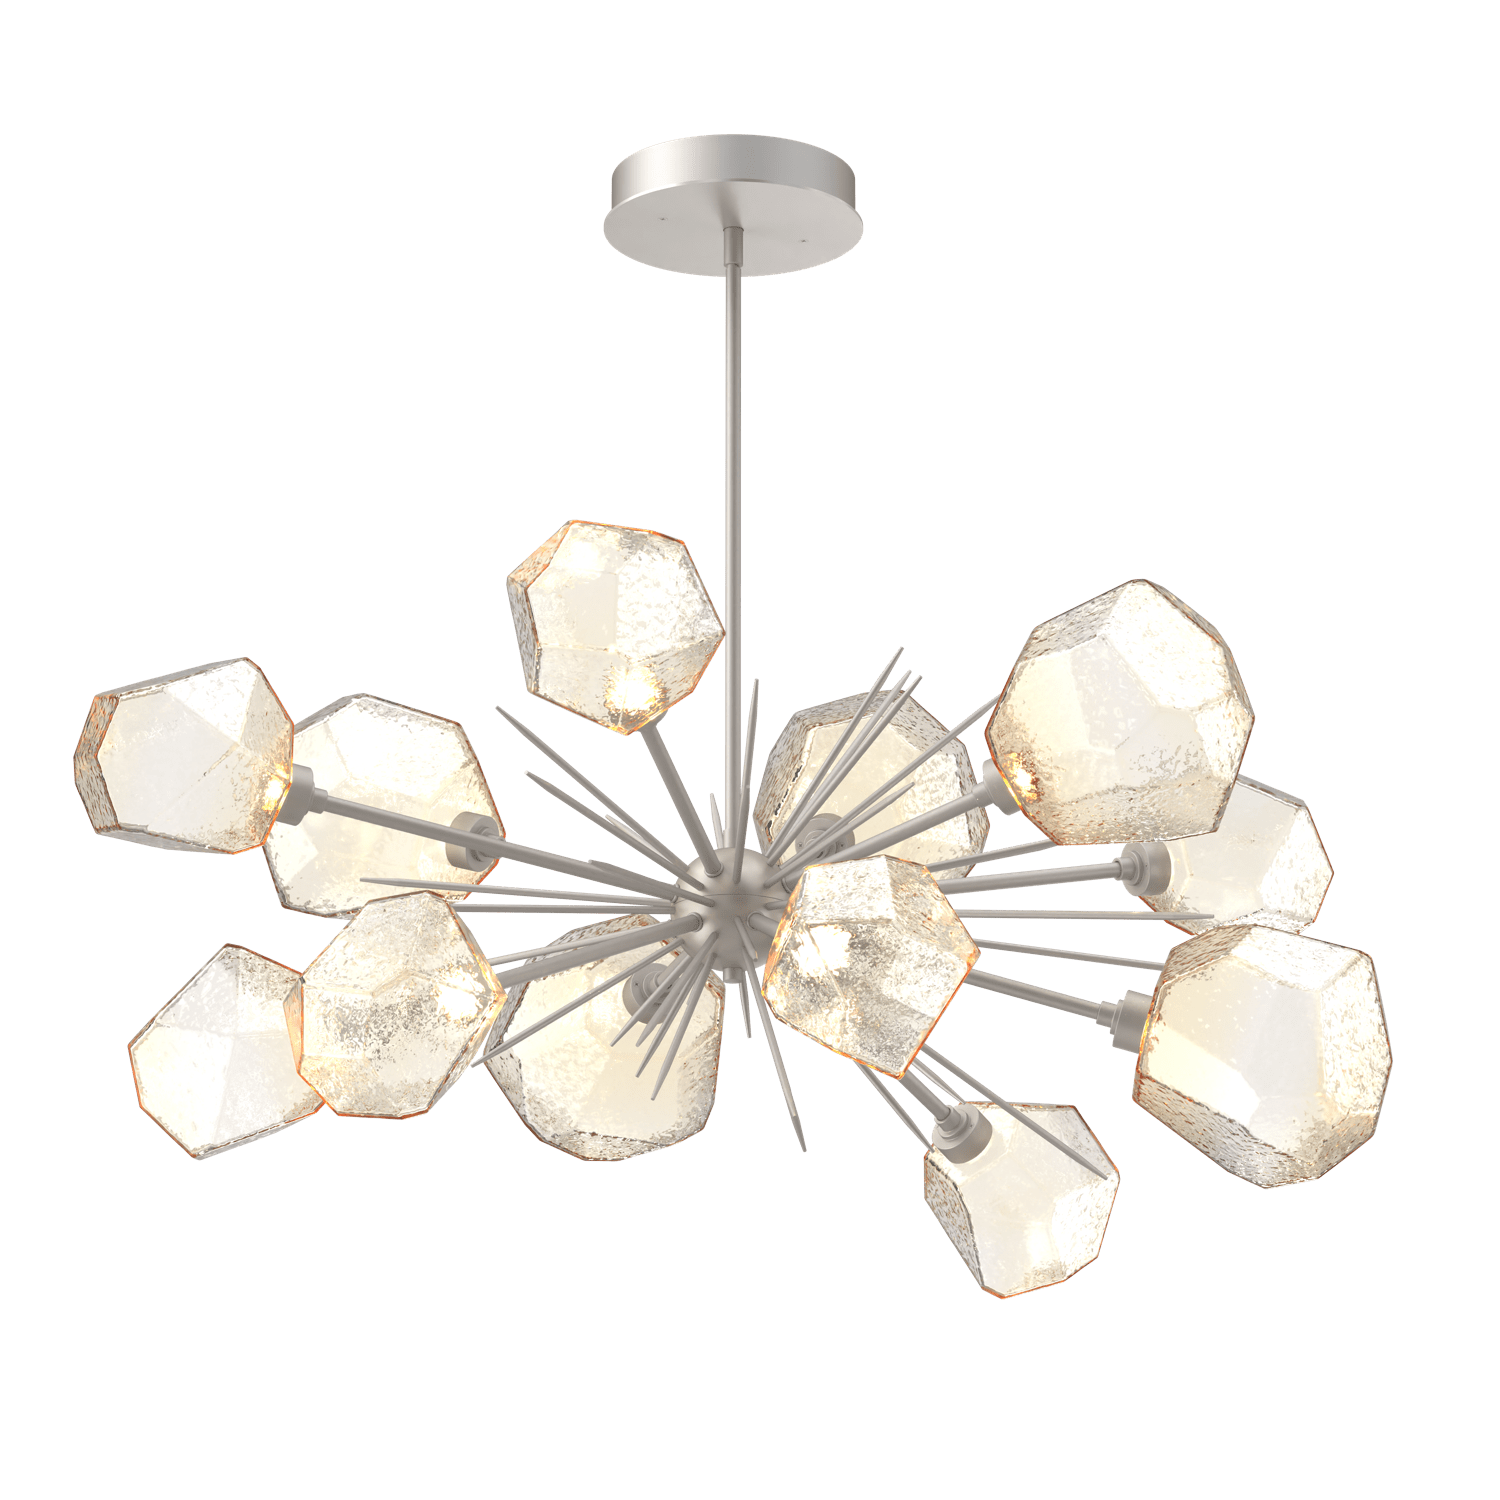 PLB0039-0D-BS-A-Hammerton-Studio-Gem-43-inch-oval-starburst-chandelier-with-metallic-beige-silver-finish-and-amber-blown-glass-shades-and-LED-lamping